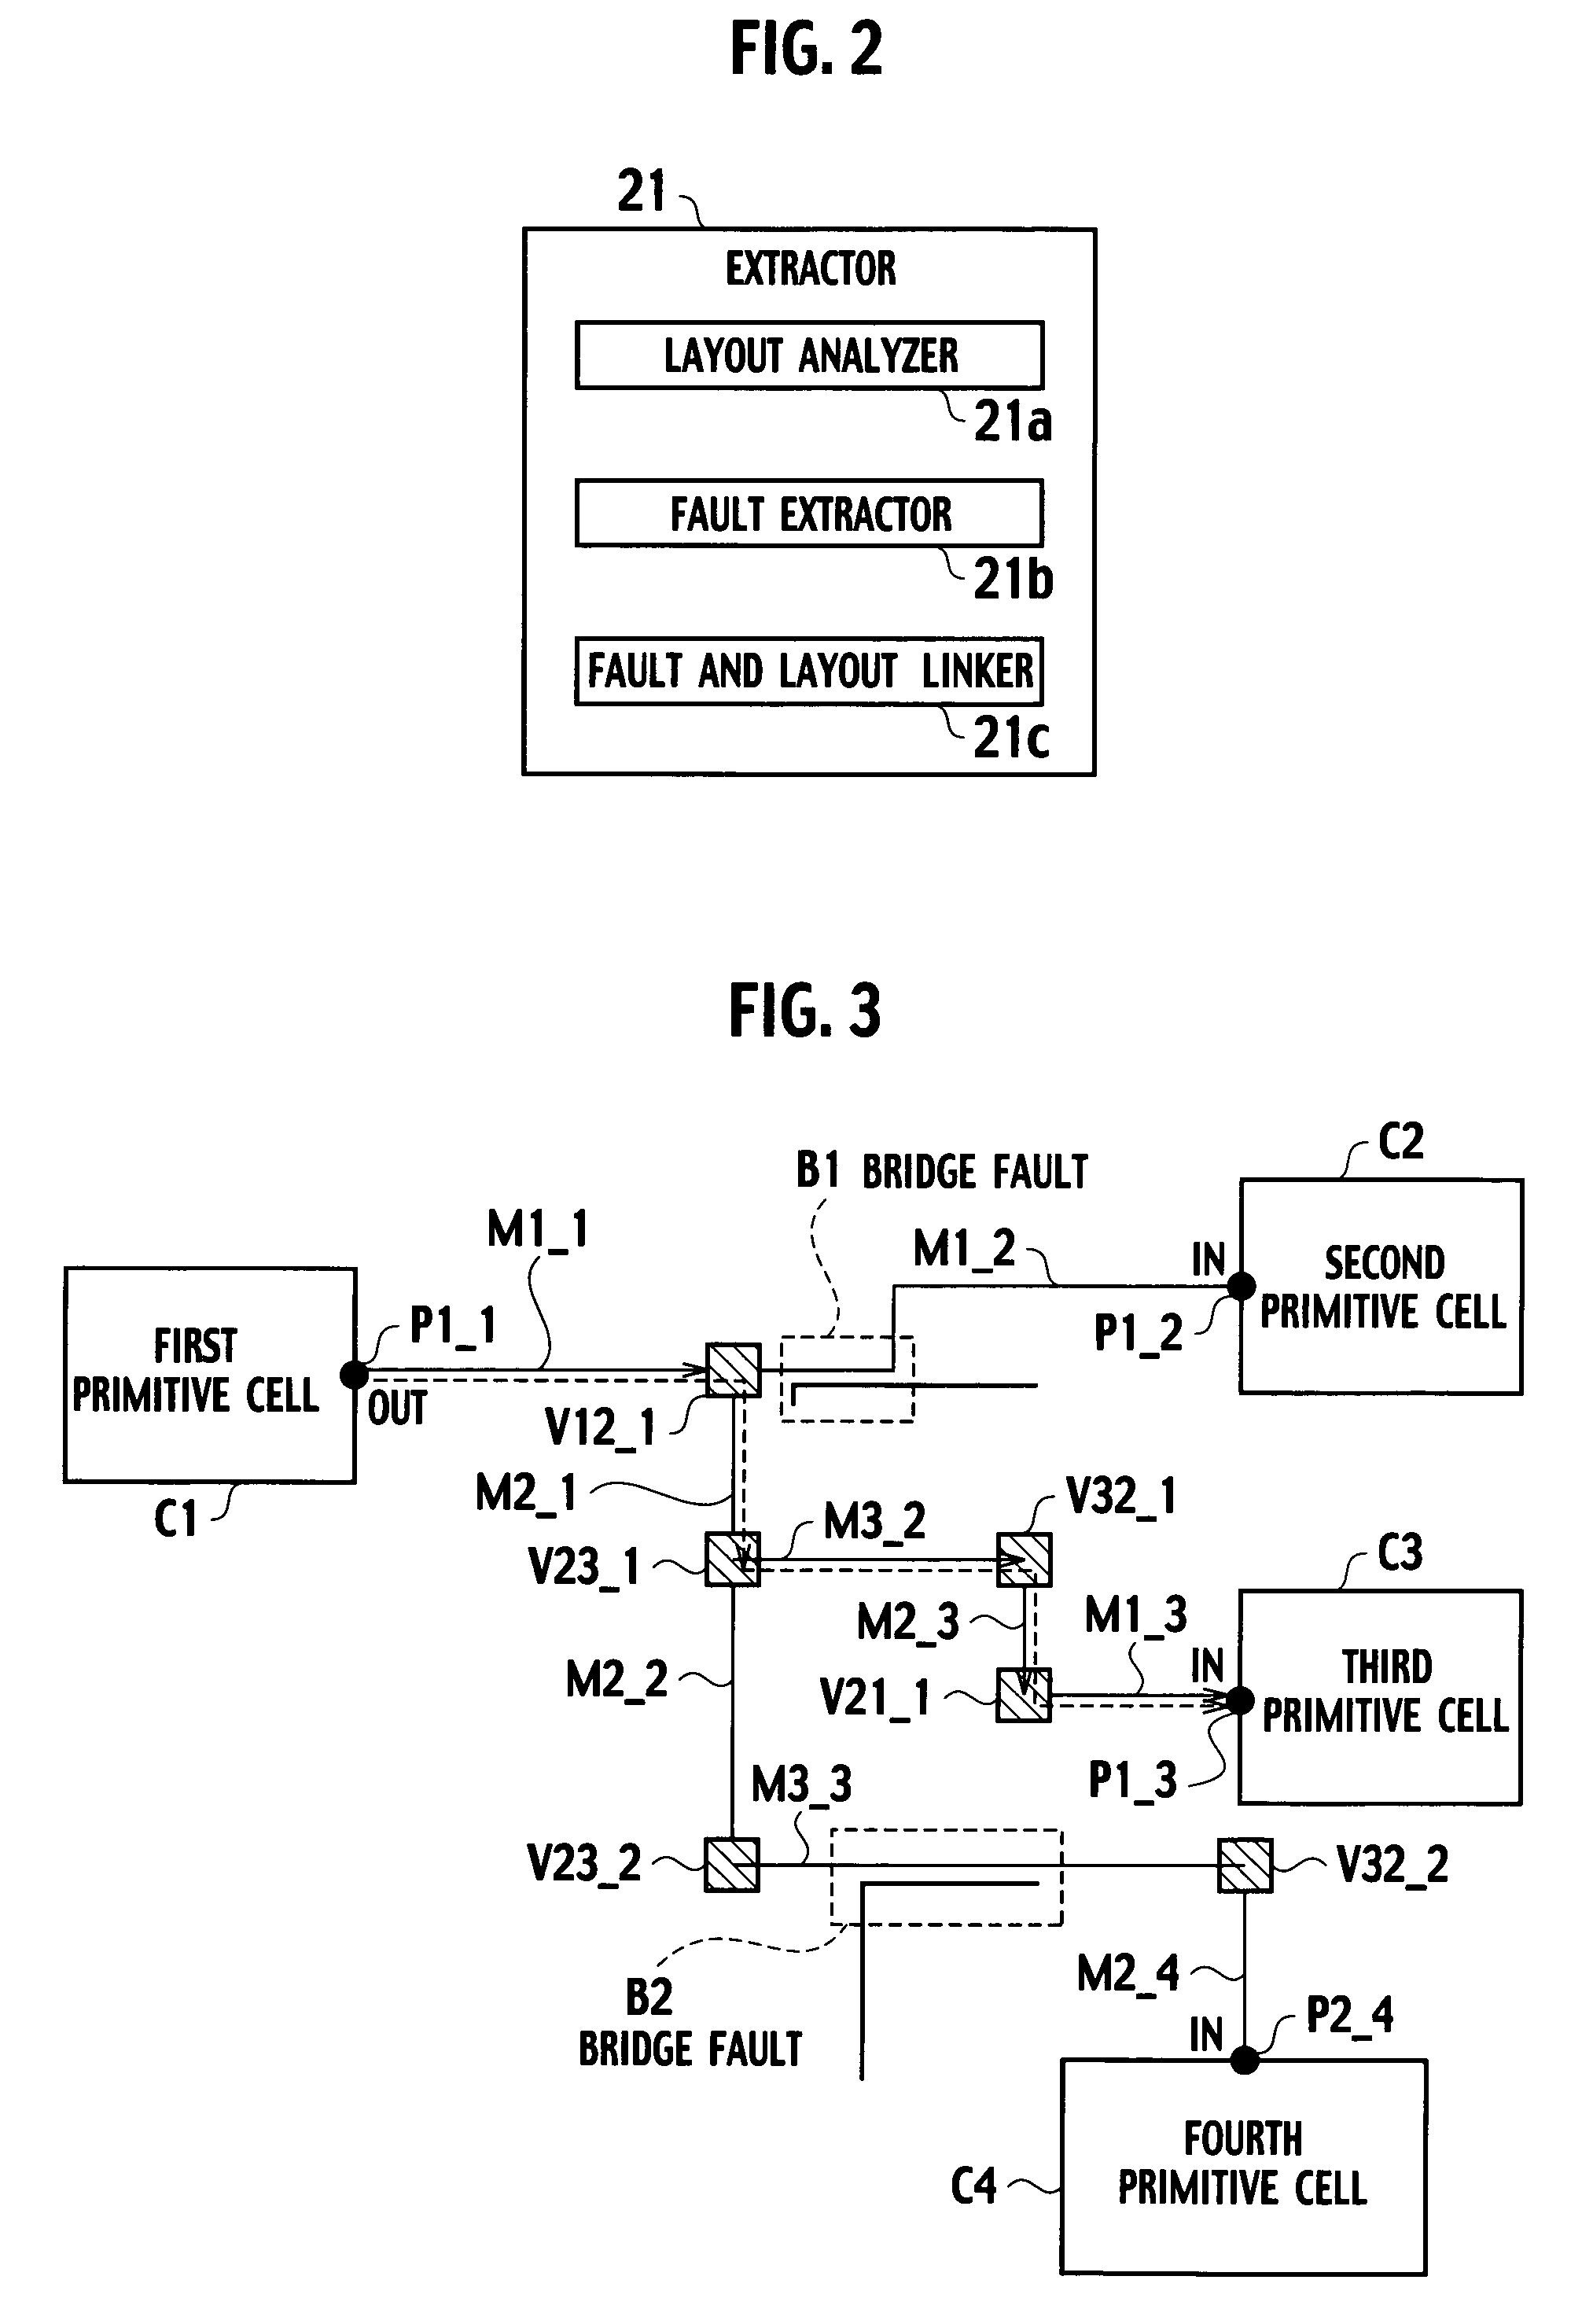 Test pattern generating apparatus, method for automatically generating test patterns and computer program product for executing an application for a test pattern generating apparatus